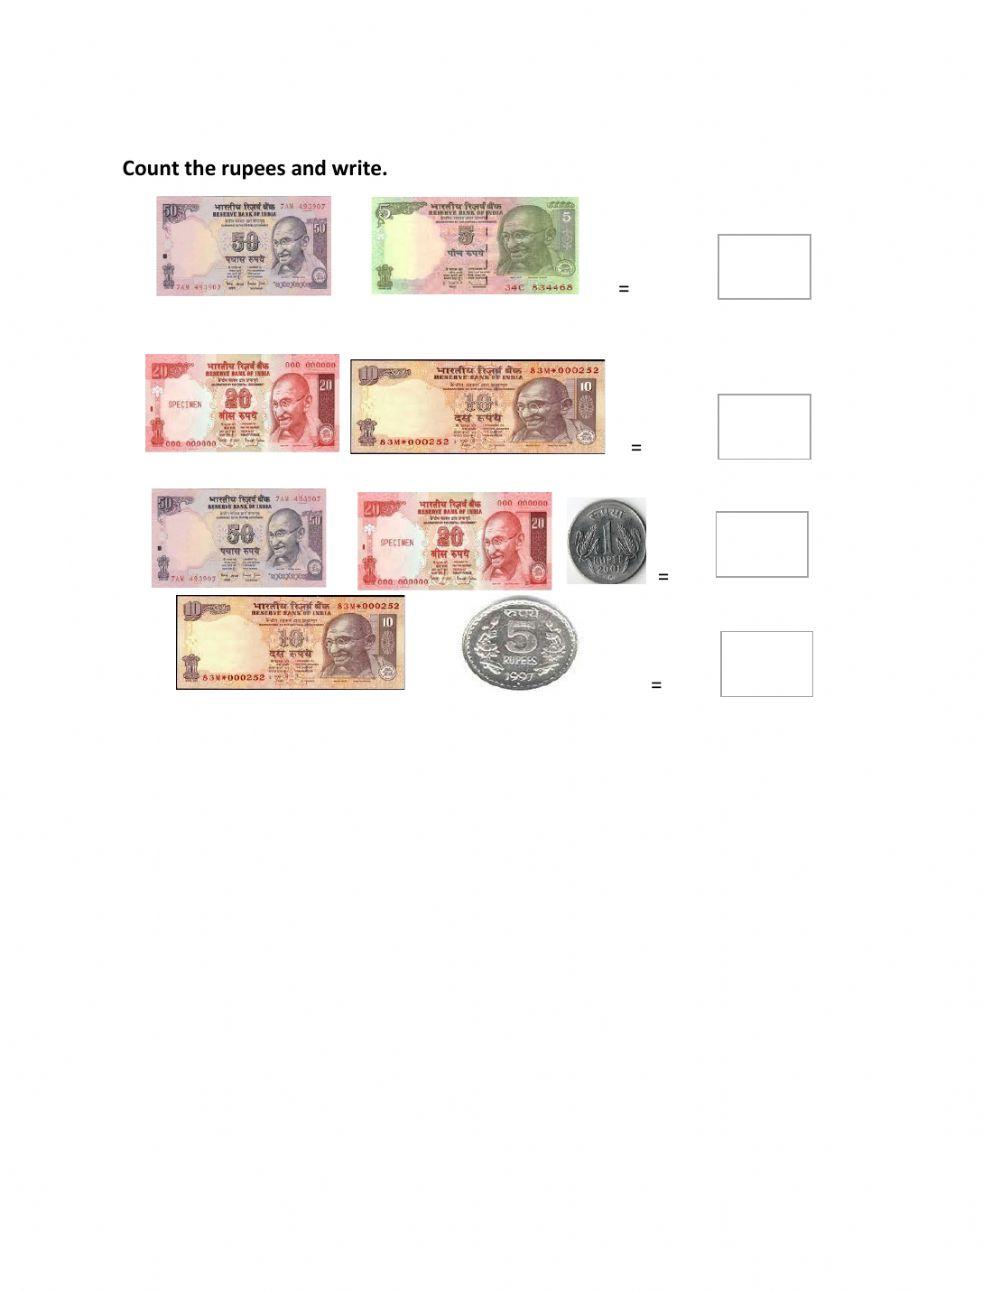 Add given currency notes